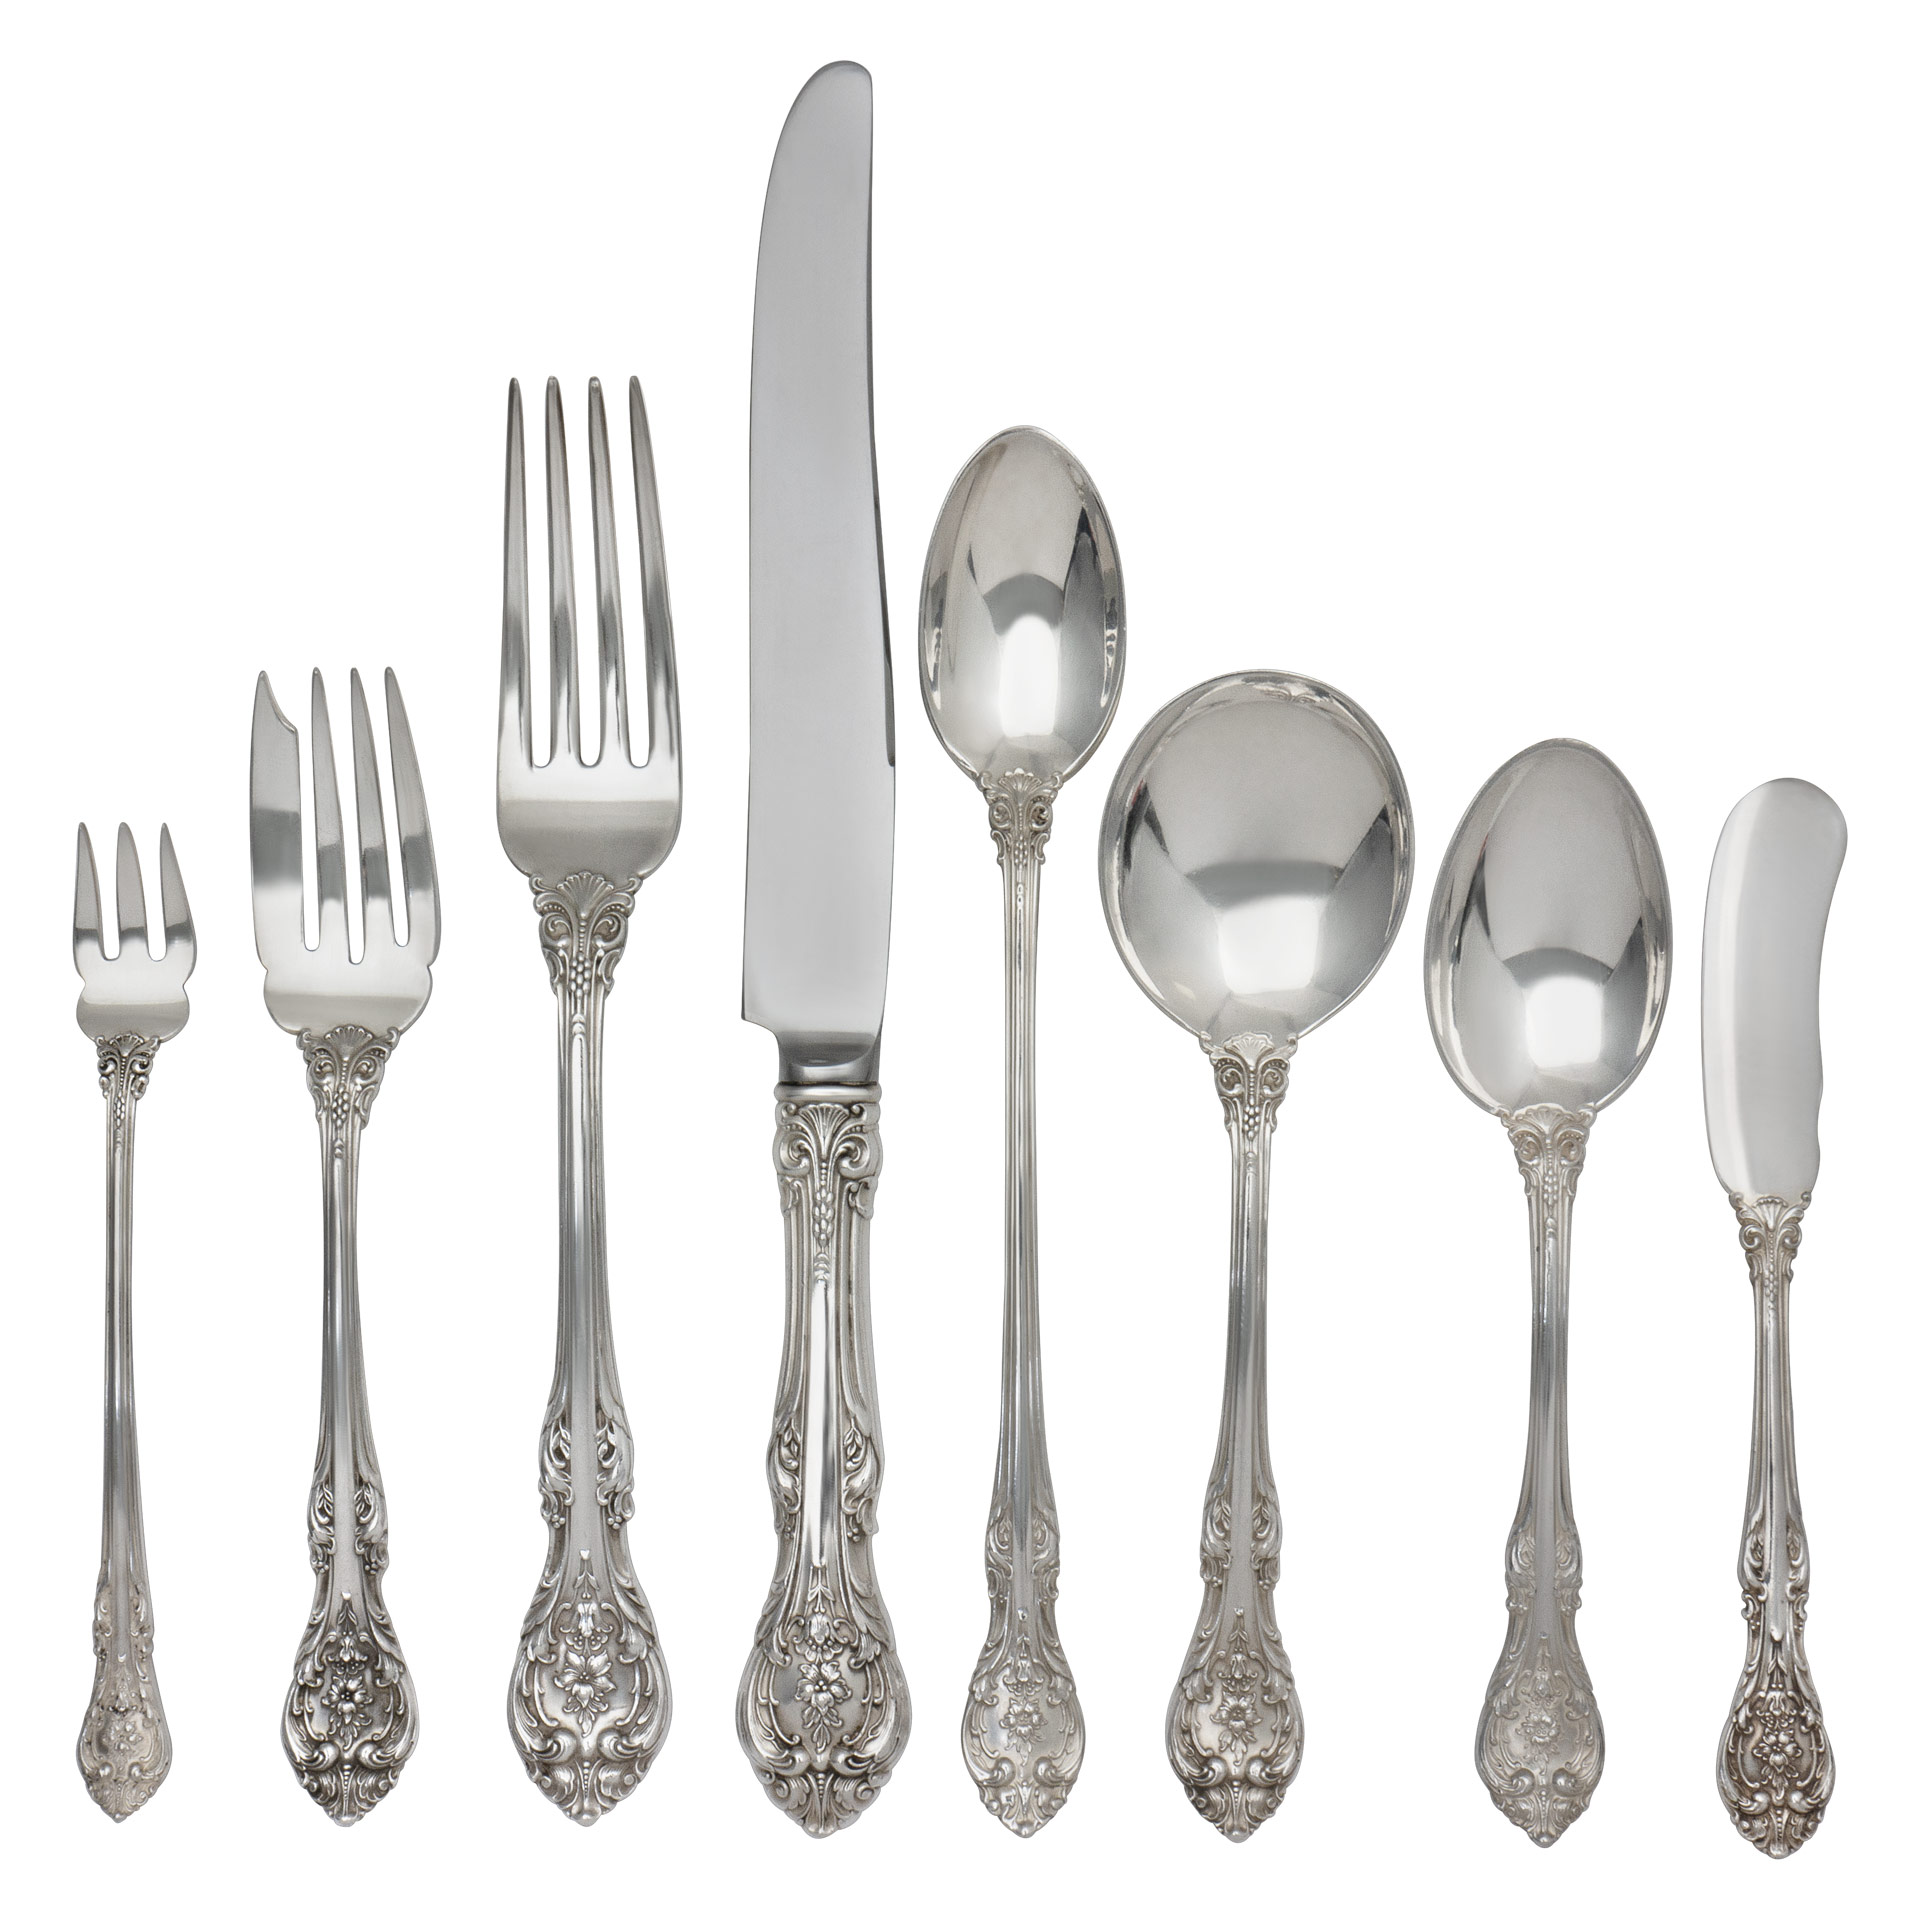 KING EDWARD Sterling Silver Flatware set patented in 1936 by Gorham- 121 pieces total. 8 Place setting for 10 + 5 Serving Pieces